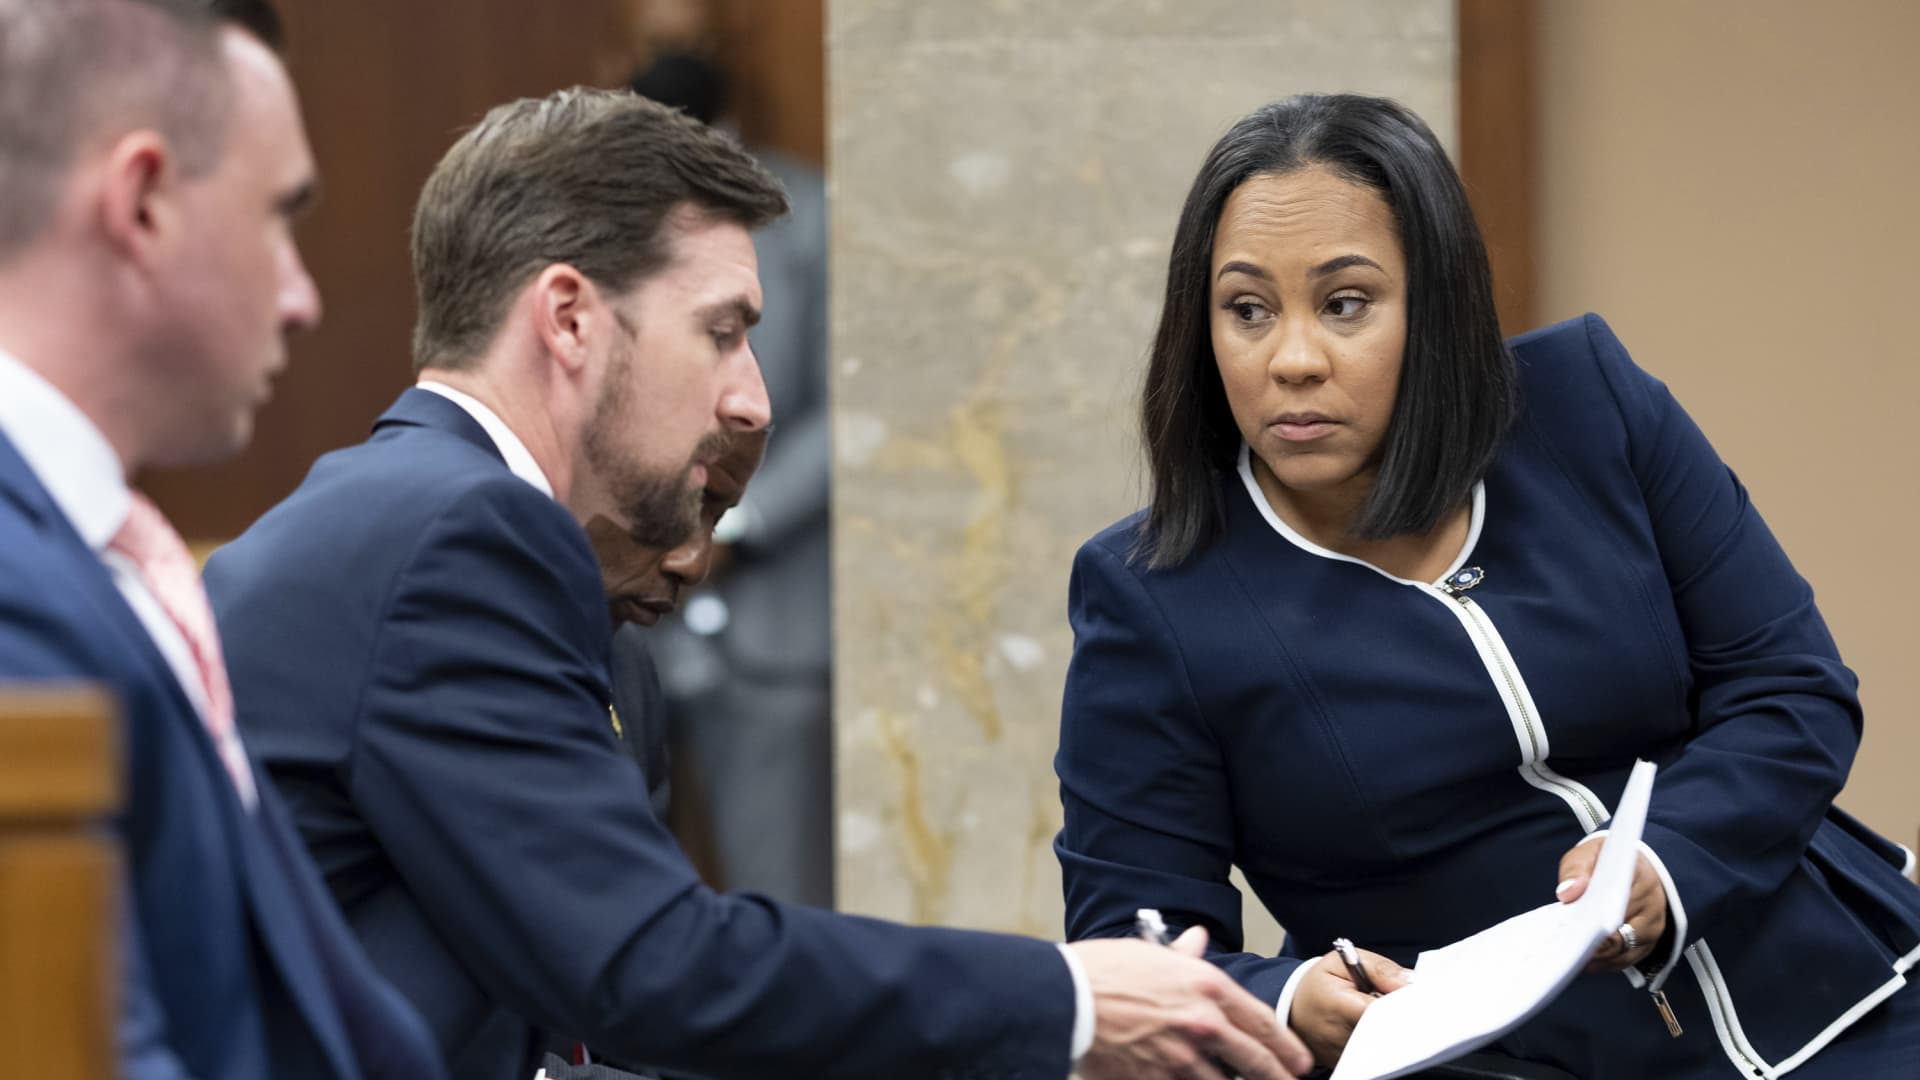 Fulton County District Attorney Fani Willis, right, talks with a member of her team during proceedings to seat a special purpose grand jury in Fulton County, Georgia, on May 2, 2022, to look into the actions of former President Donald Trump and his supporters who tried to overturn the results of the 2020 election.